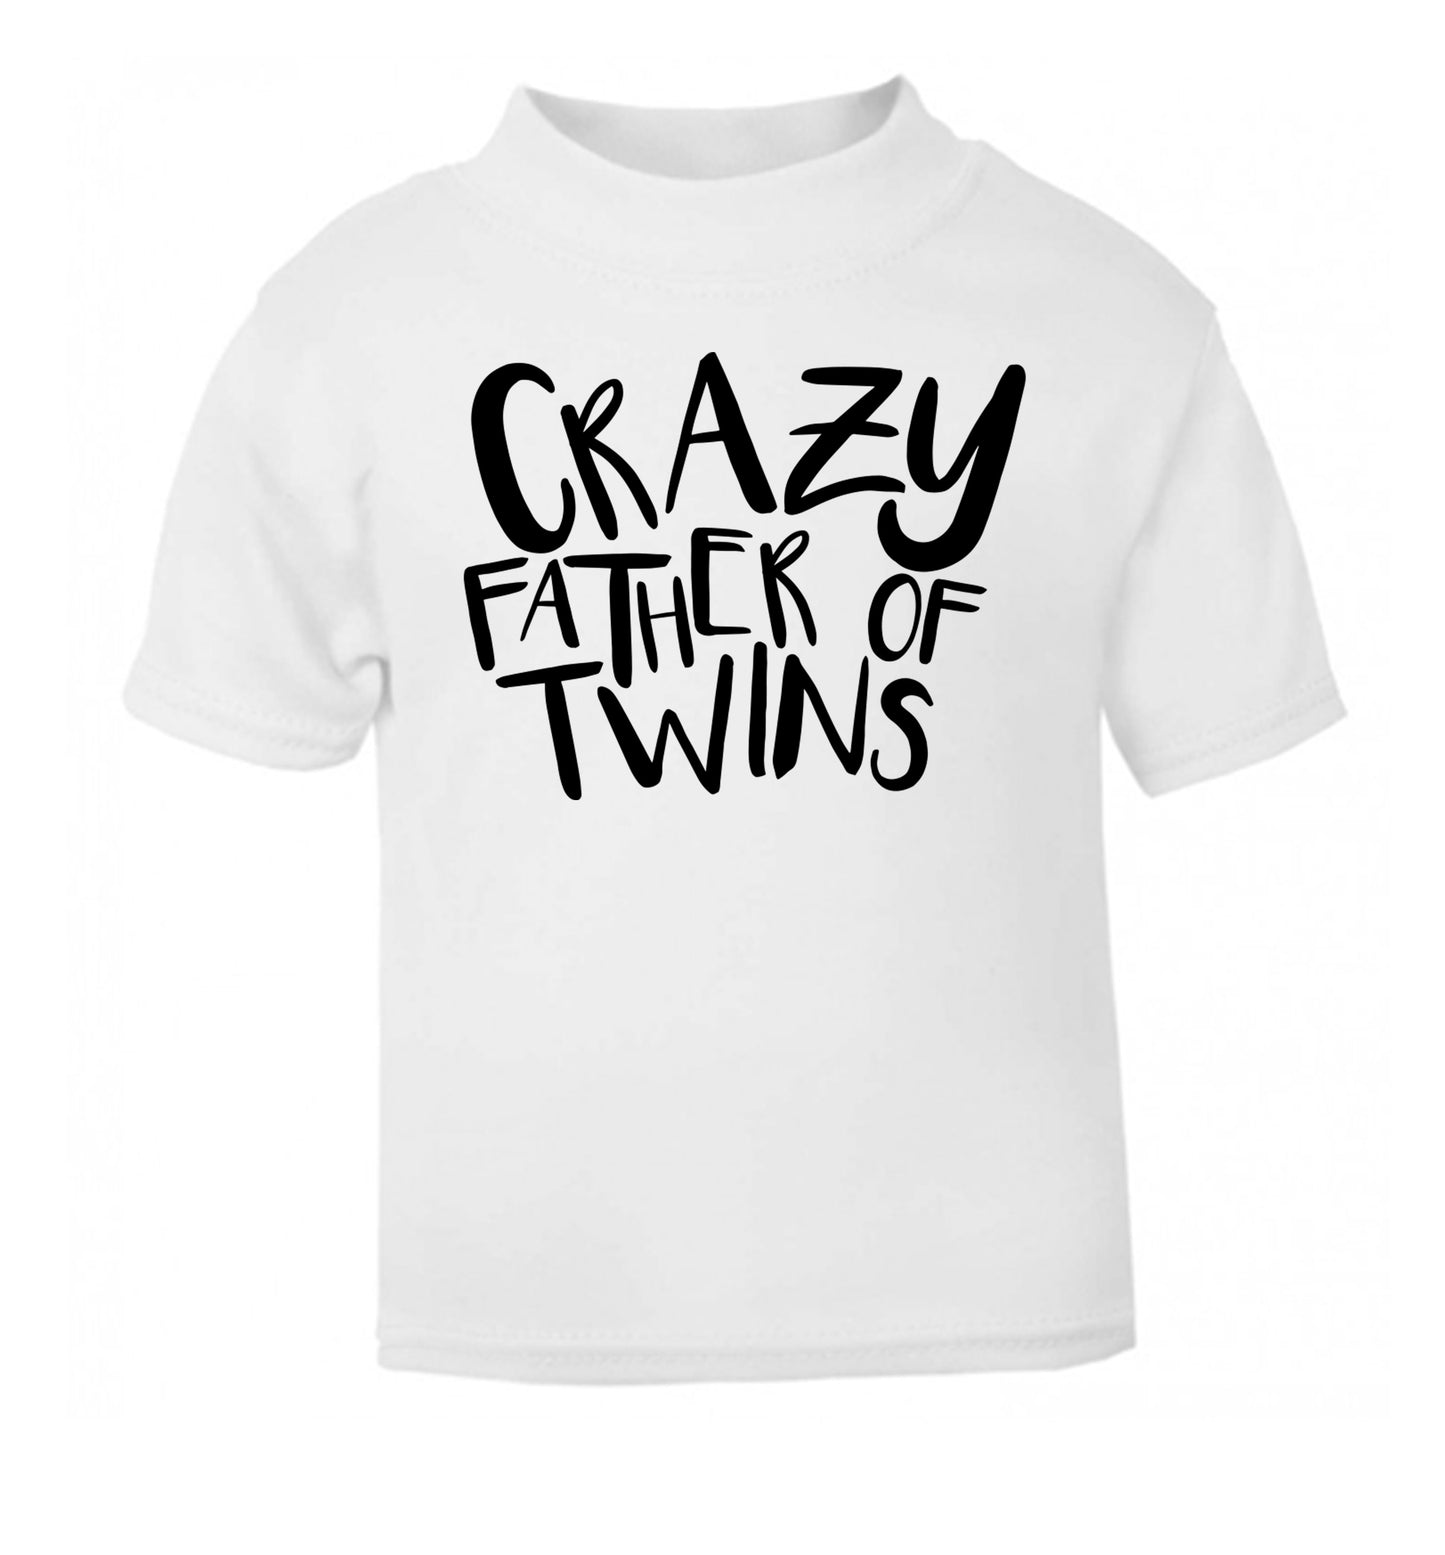 Crazy father of twins white Baby Toddler Tshirt 2 Years